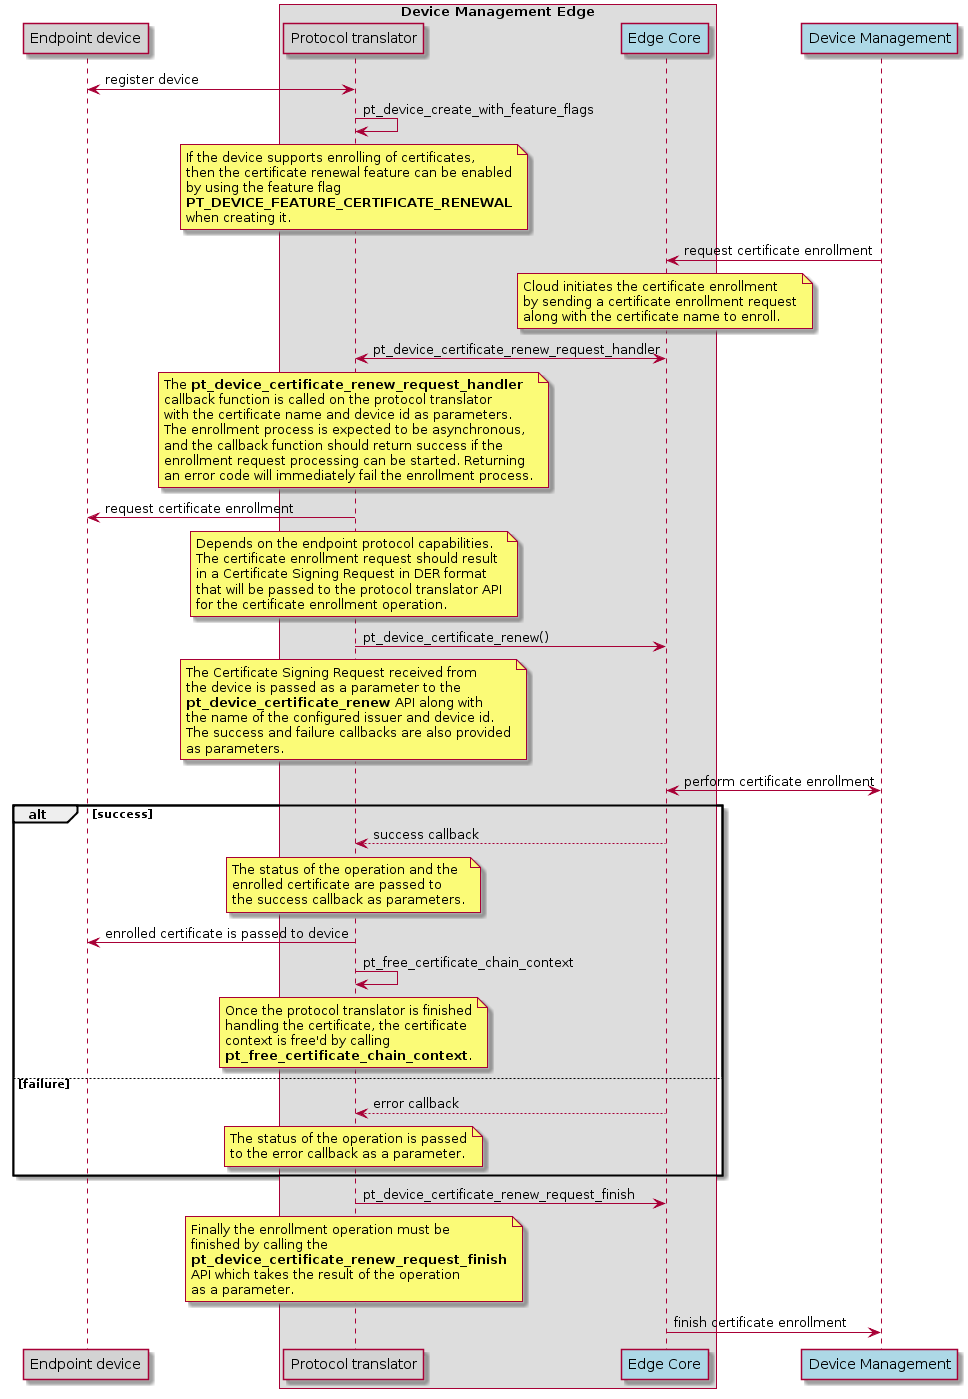 Sequence diagram for Device Management-initiated certificate enrollment